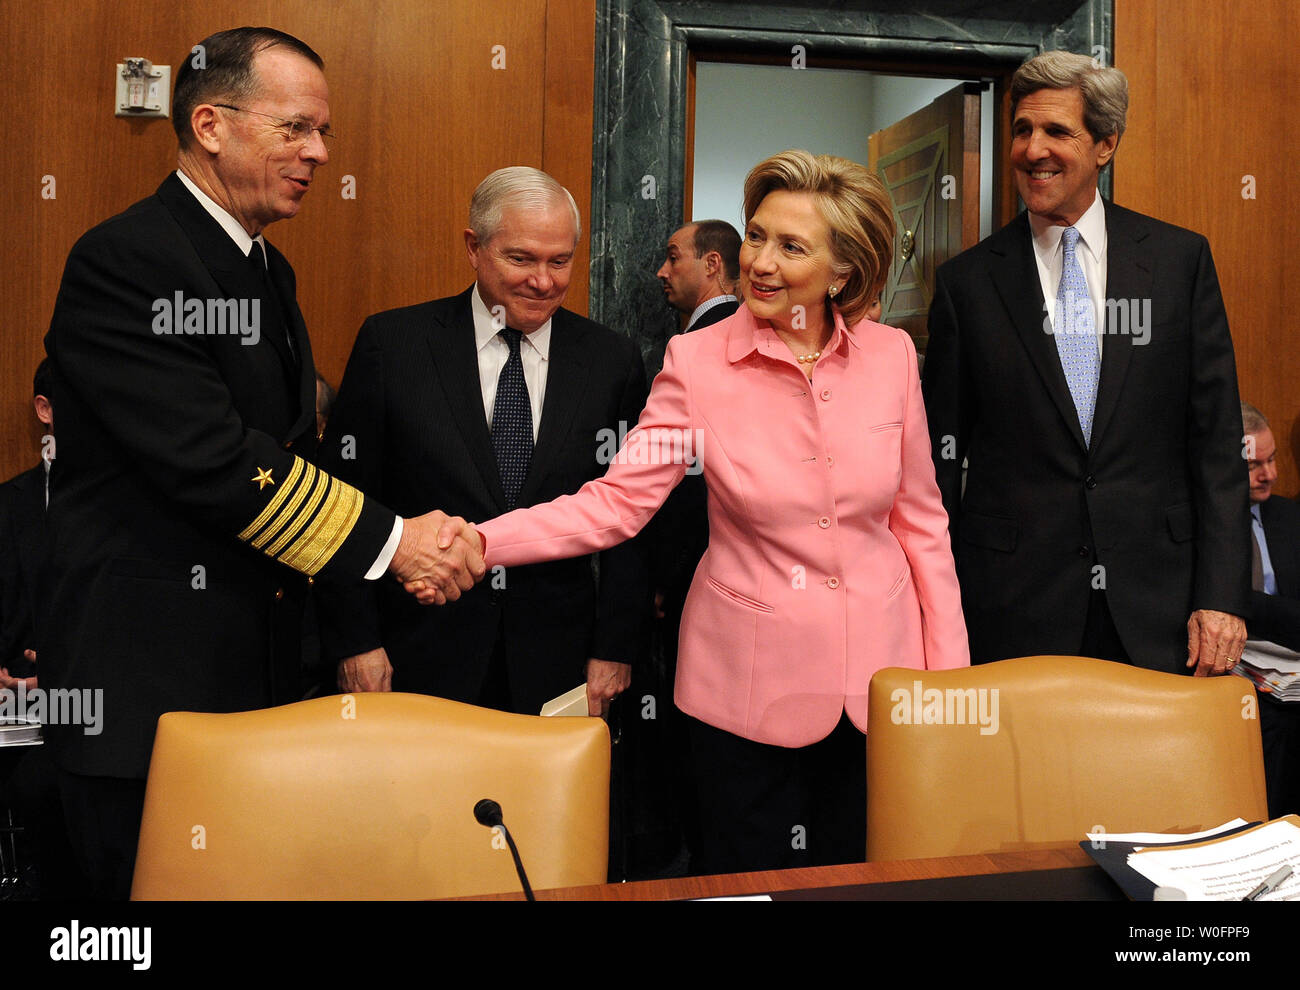 Secretary of State Hillary Rodham Clinton shakes hands with Chairman of the Joint Chiefs of Staff Adm. Michael Mullen as Secretary of Defense Robert Gates and Sen. John Kerry, D-MA, look on before the Senate Foreign Relations Committee regarding the new START treaty on Capitol Hill in Washington on May 18, 2010. The Strategic Arms Reduction Treaty (START) between the U.S. and Russia, aimed at reducing nuclear arms, was signed in Prague on April 8, 2010.   UPI/Roger L. Wollenberg Stock Photo